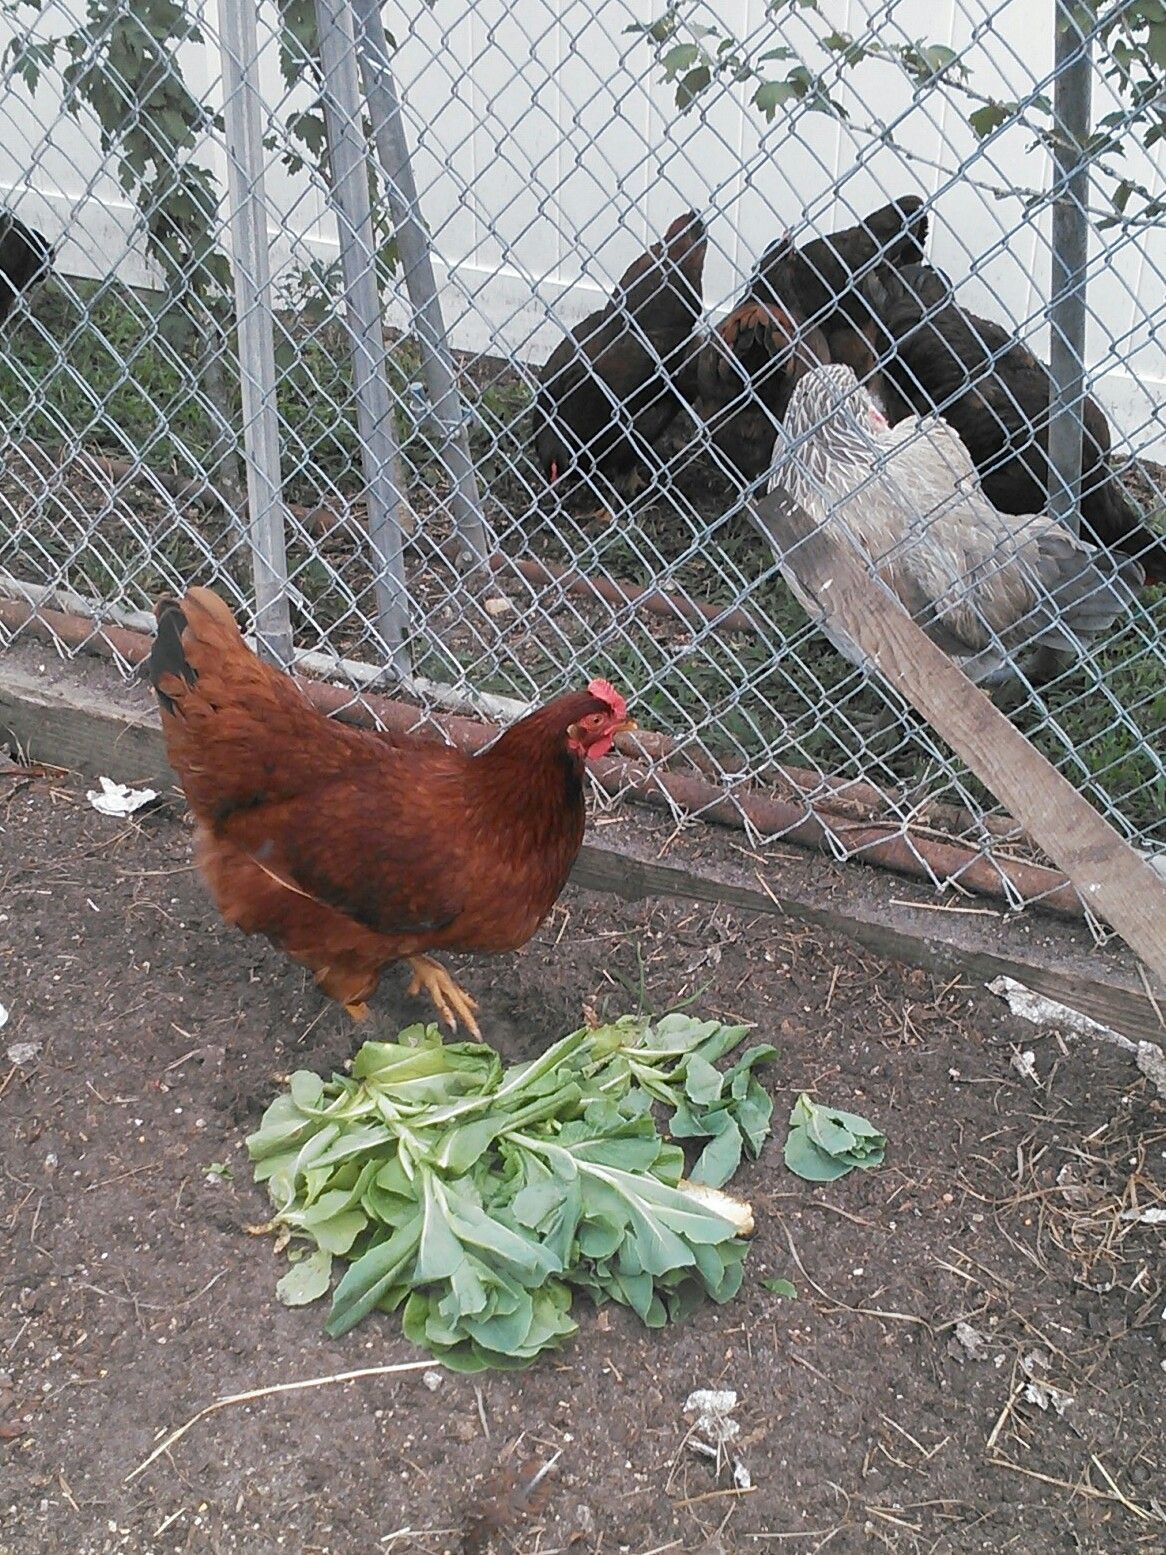 Lettuce that bolted, chickens loved it.